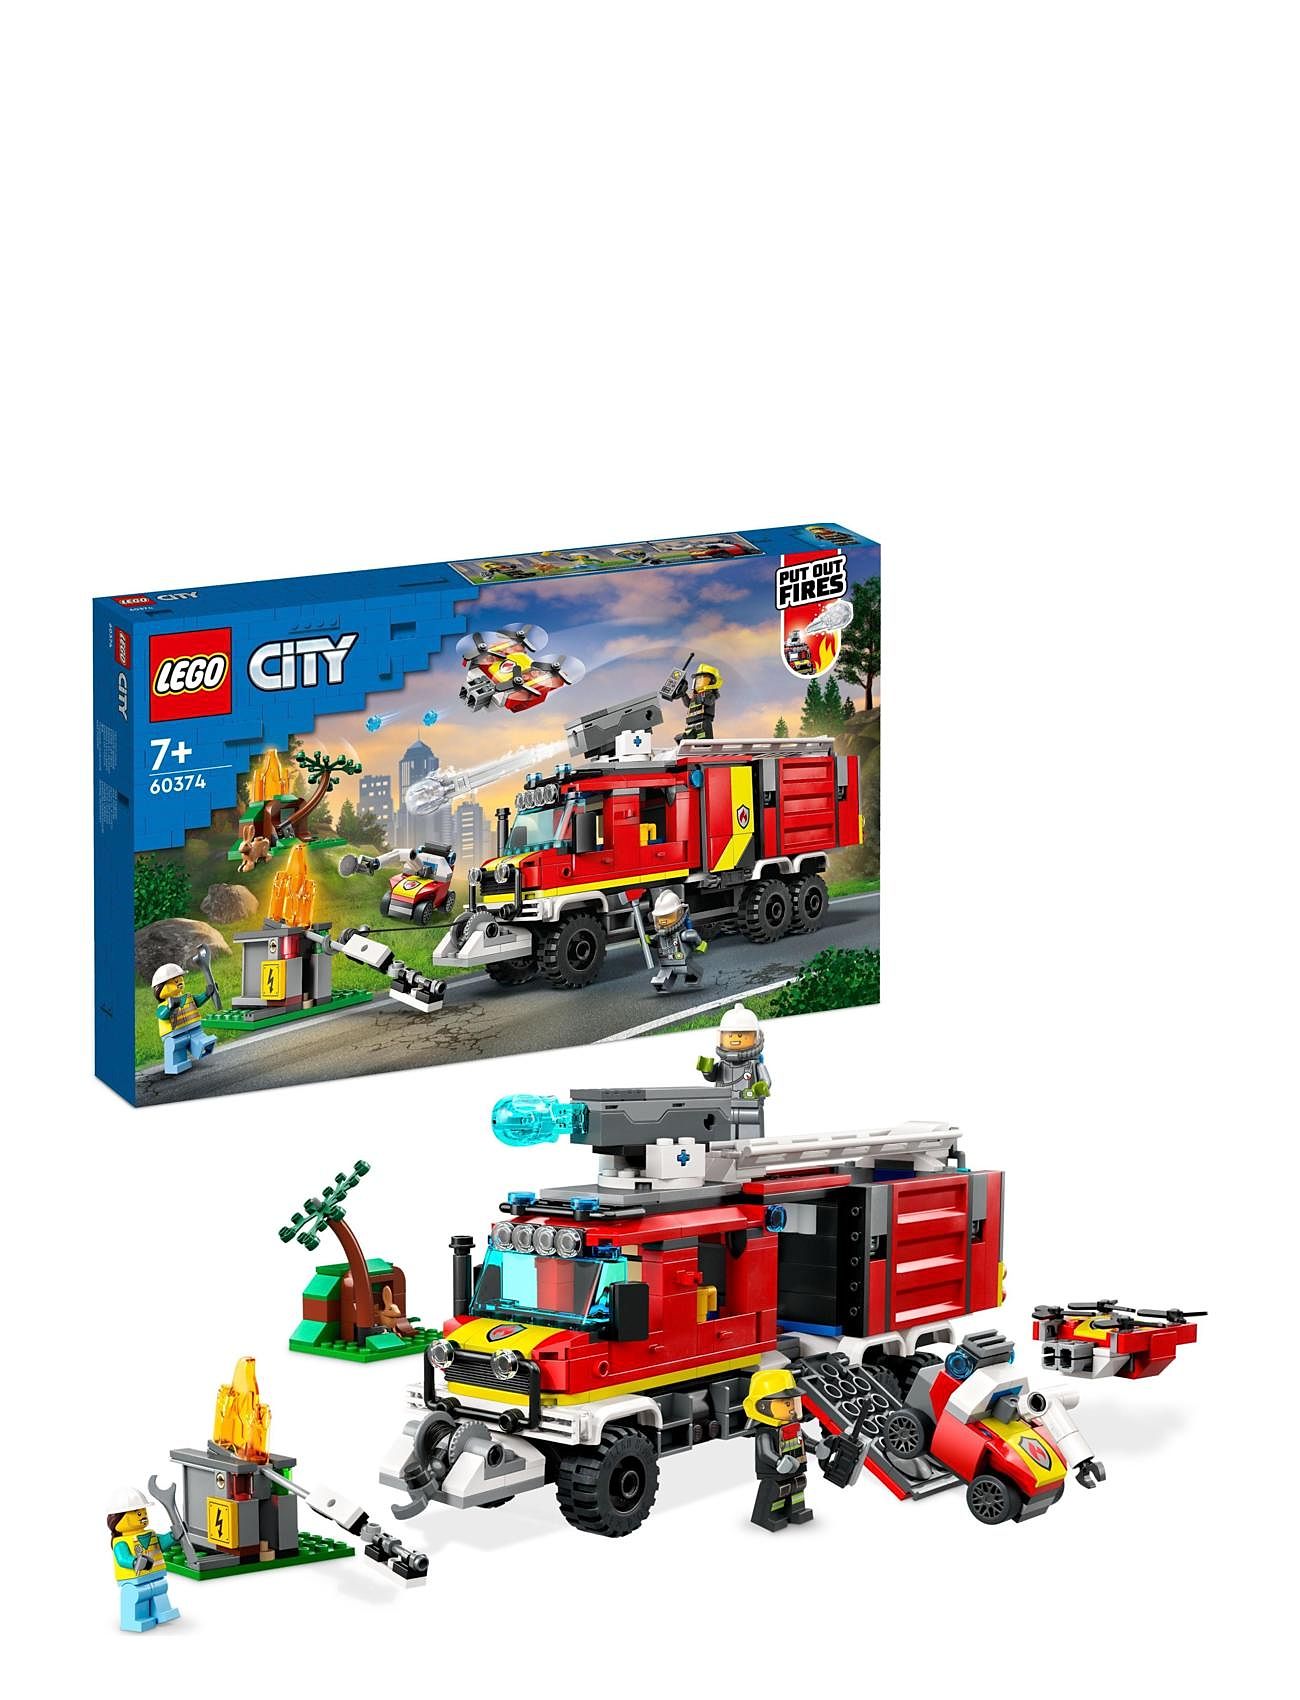 Fire Command Unit Set With Fire Engine Toy Toys Lego Toys Lego city Multi/patterned LEGO